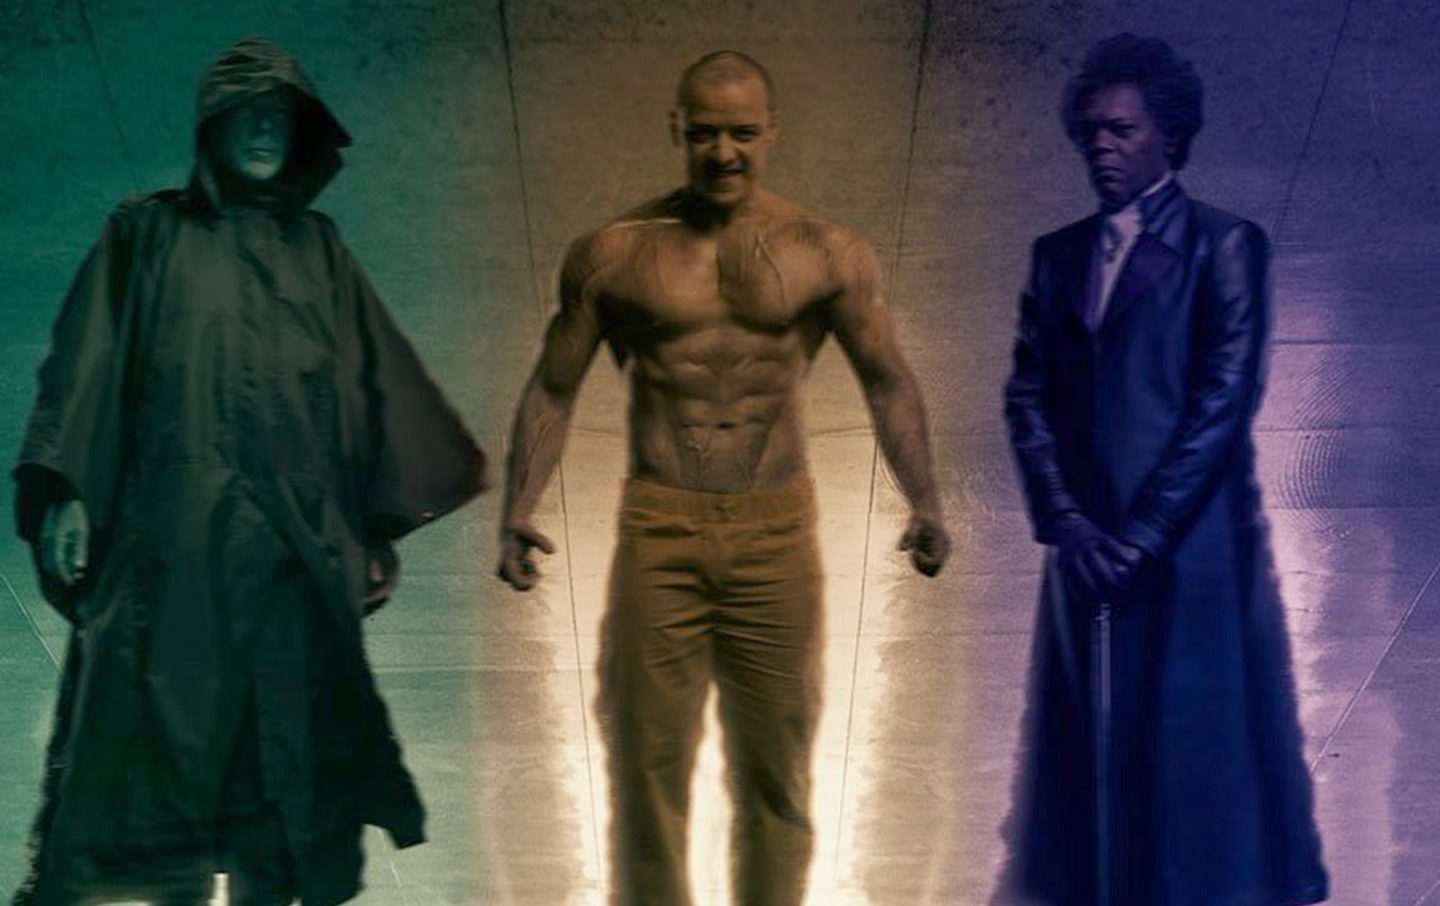 WIN: Get Tix To A Q&A With M. Night Shyamalan + A Preview Screening Of ‘Glass’